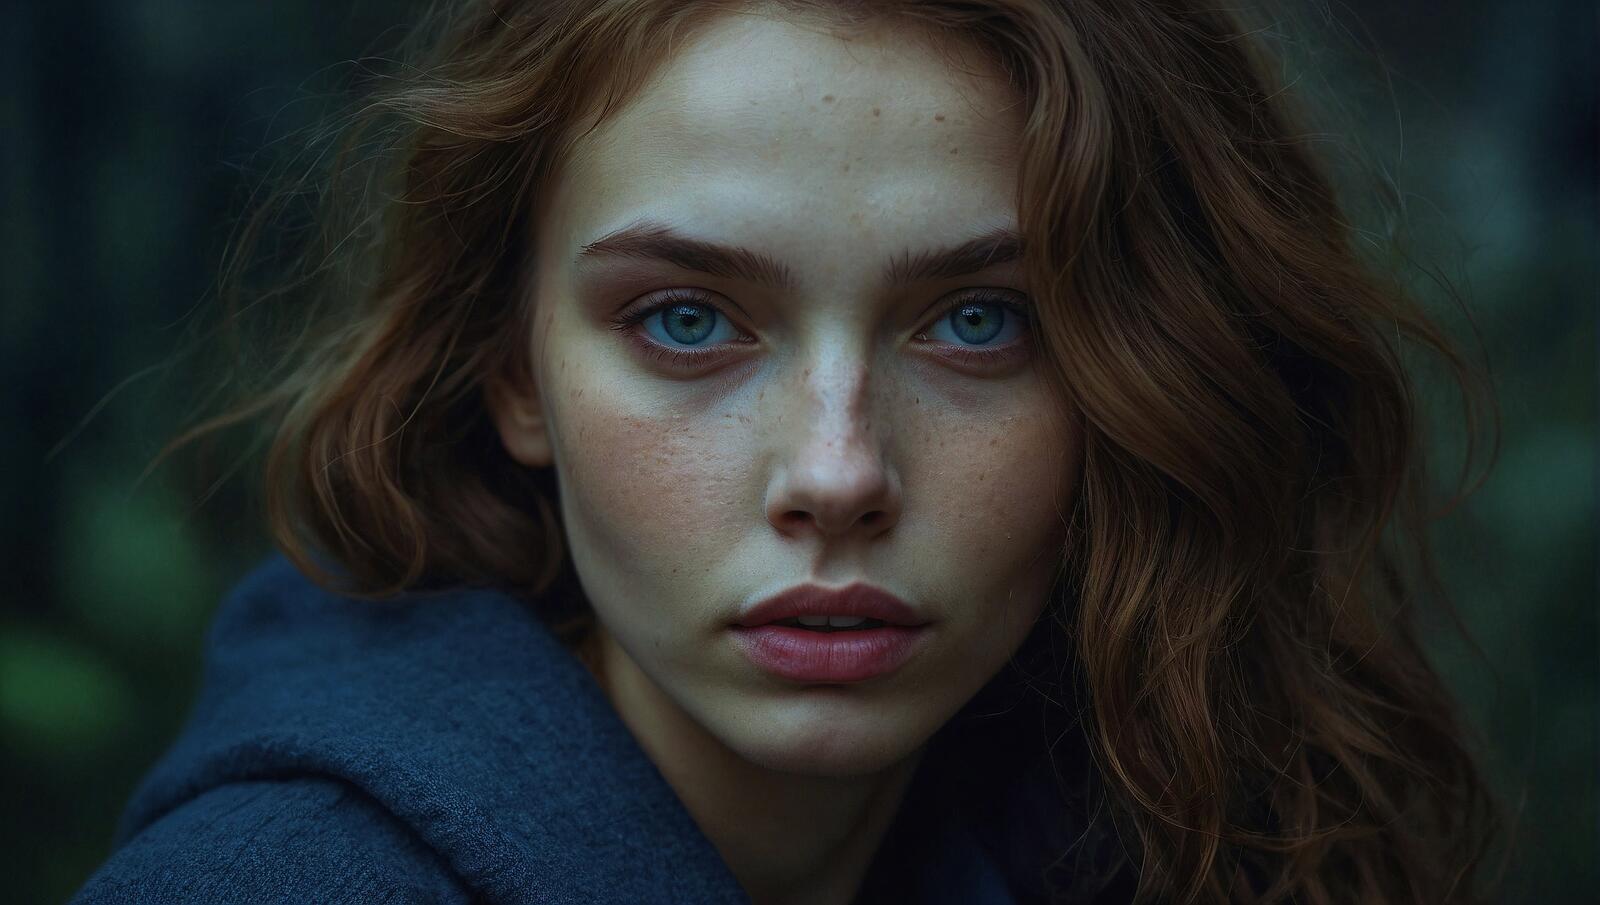 Free photo A young girl with freckled hair stares ahead